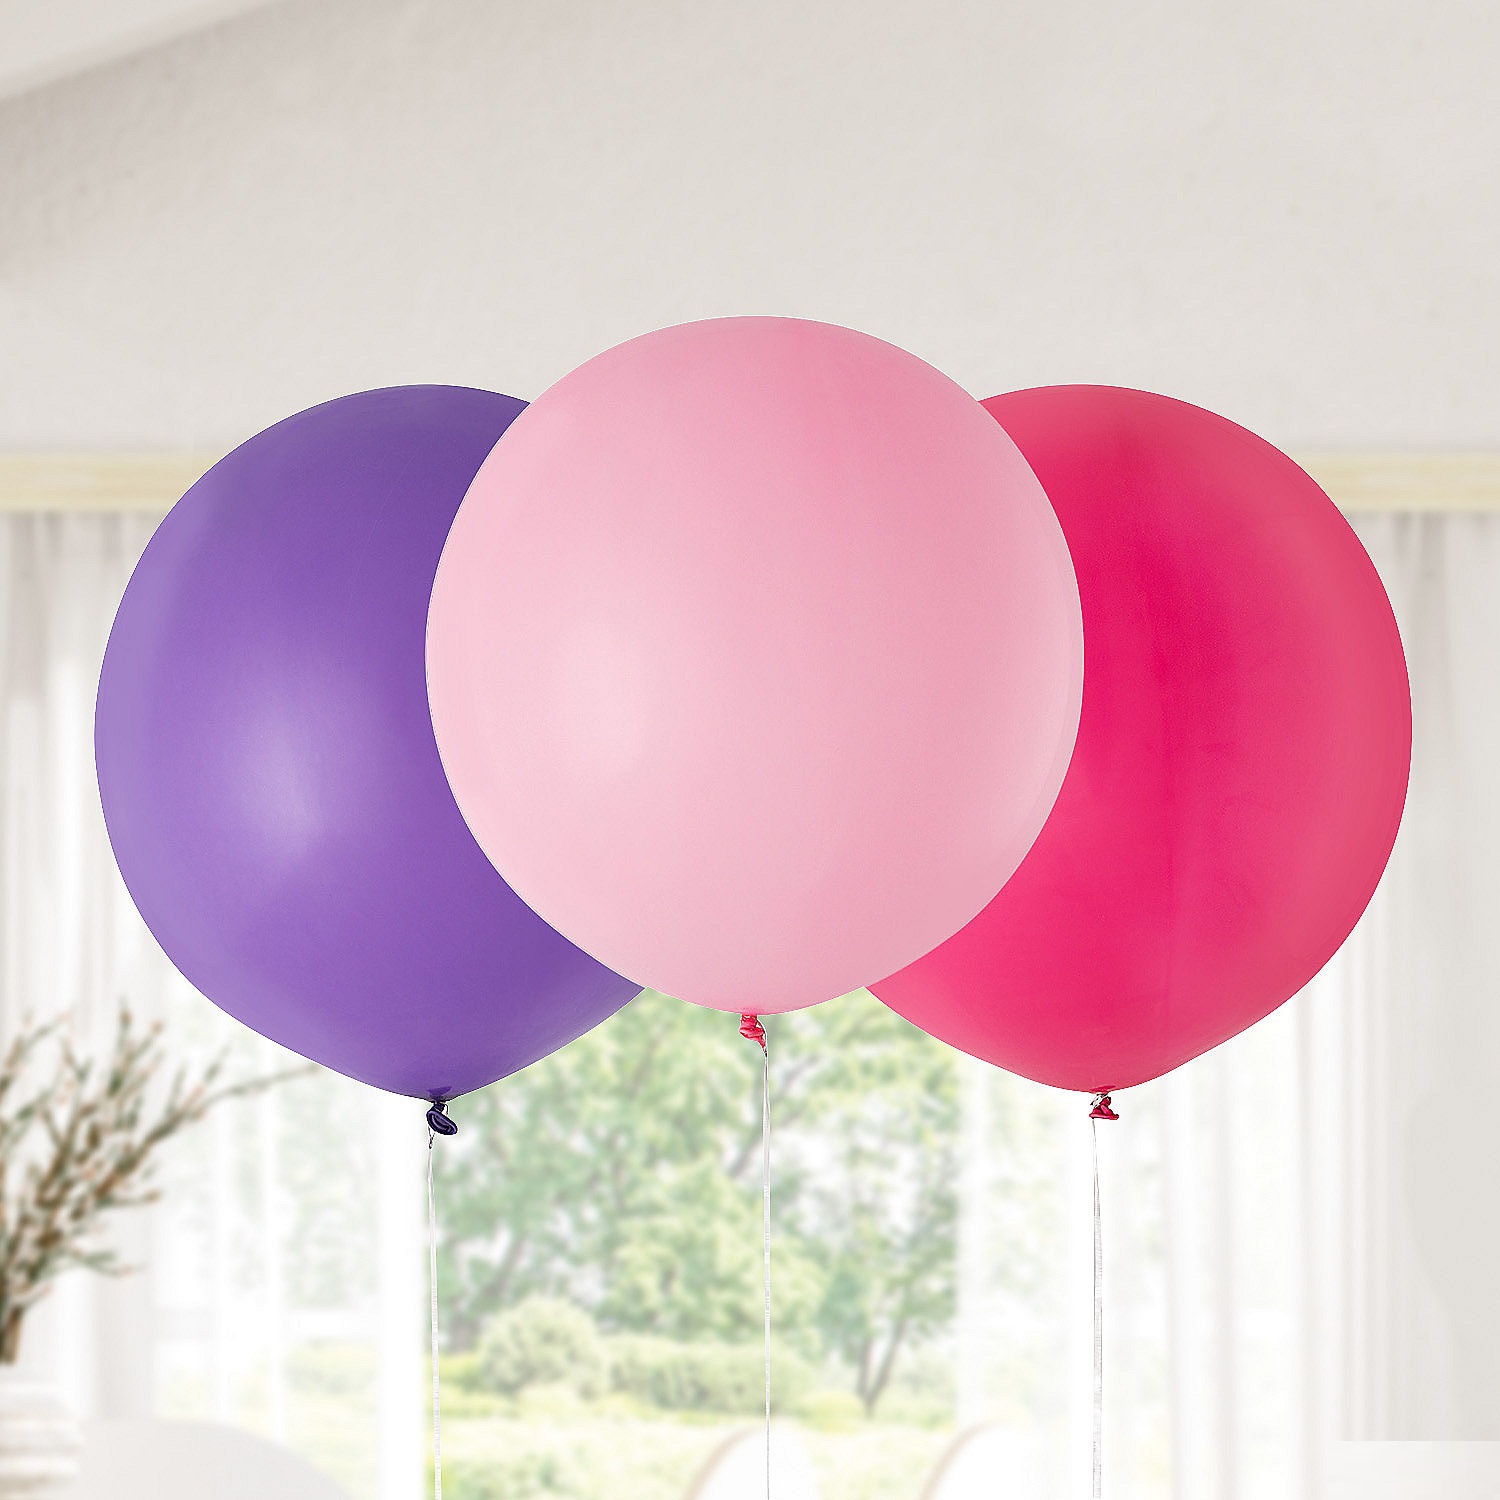 pink-and-purple-24-latex-balloons-3-pc-_13839066-a02